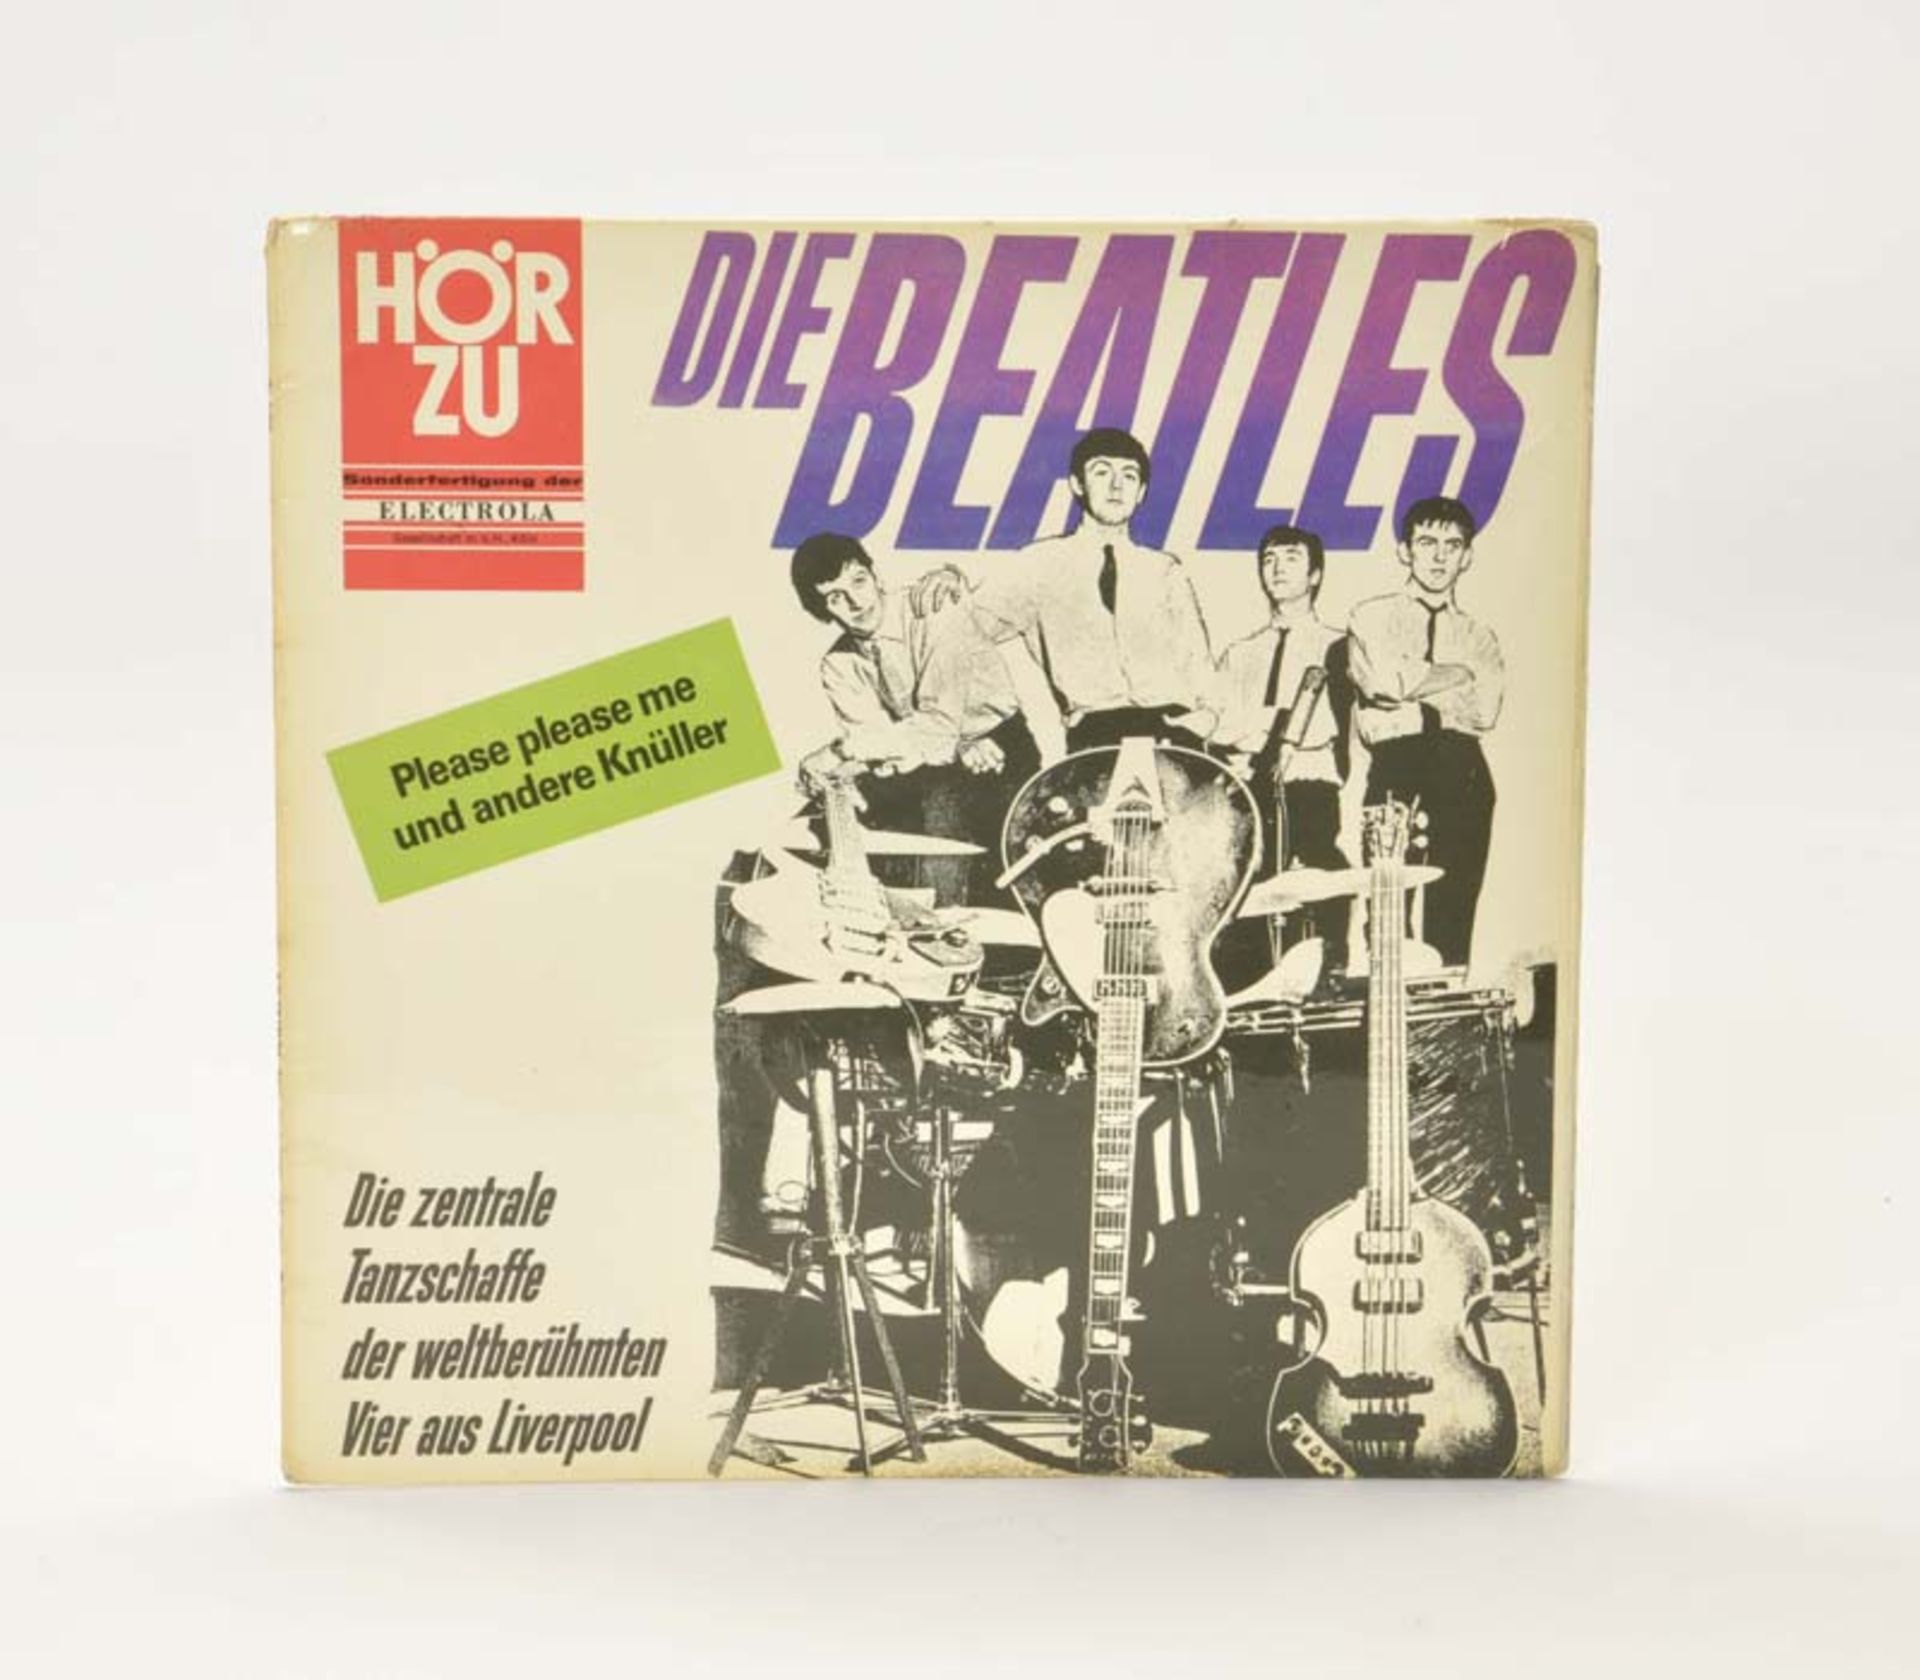 Record, First Edition "The Beatles" Magazine Hörzu from 1964, rare mono version HZE 117<